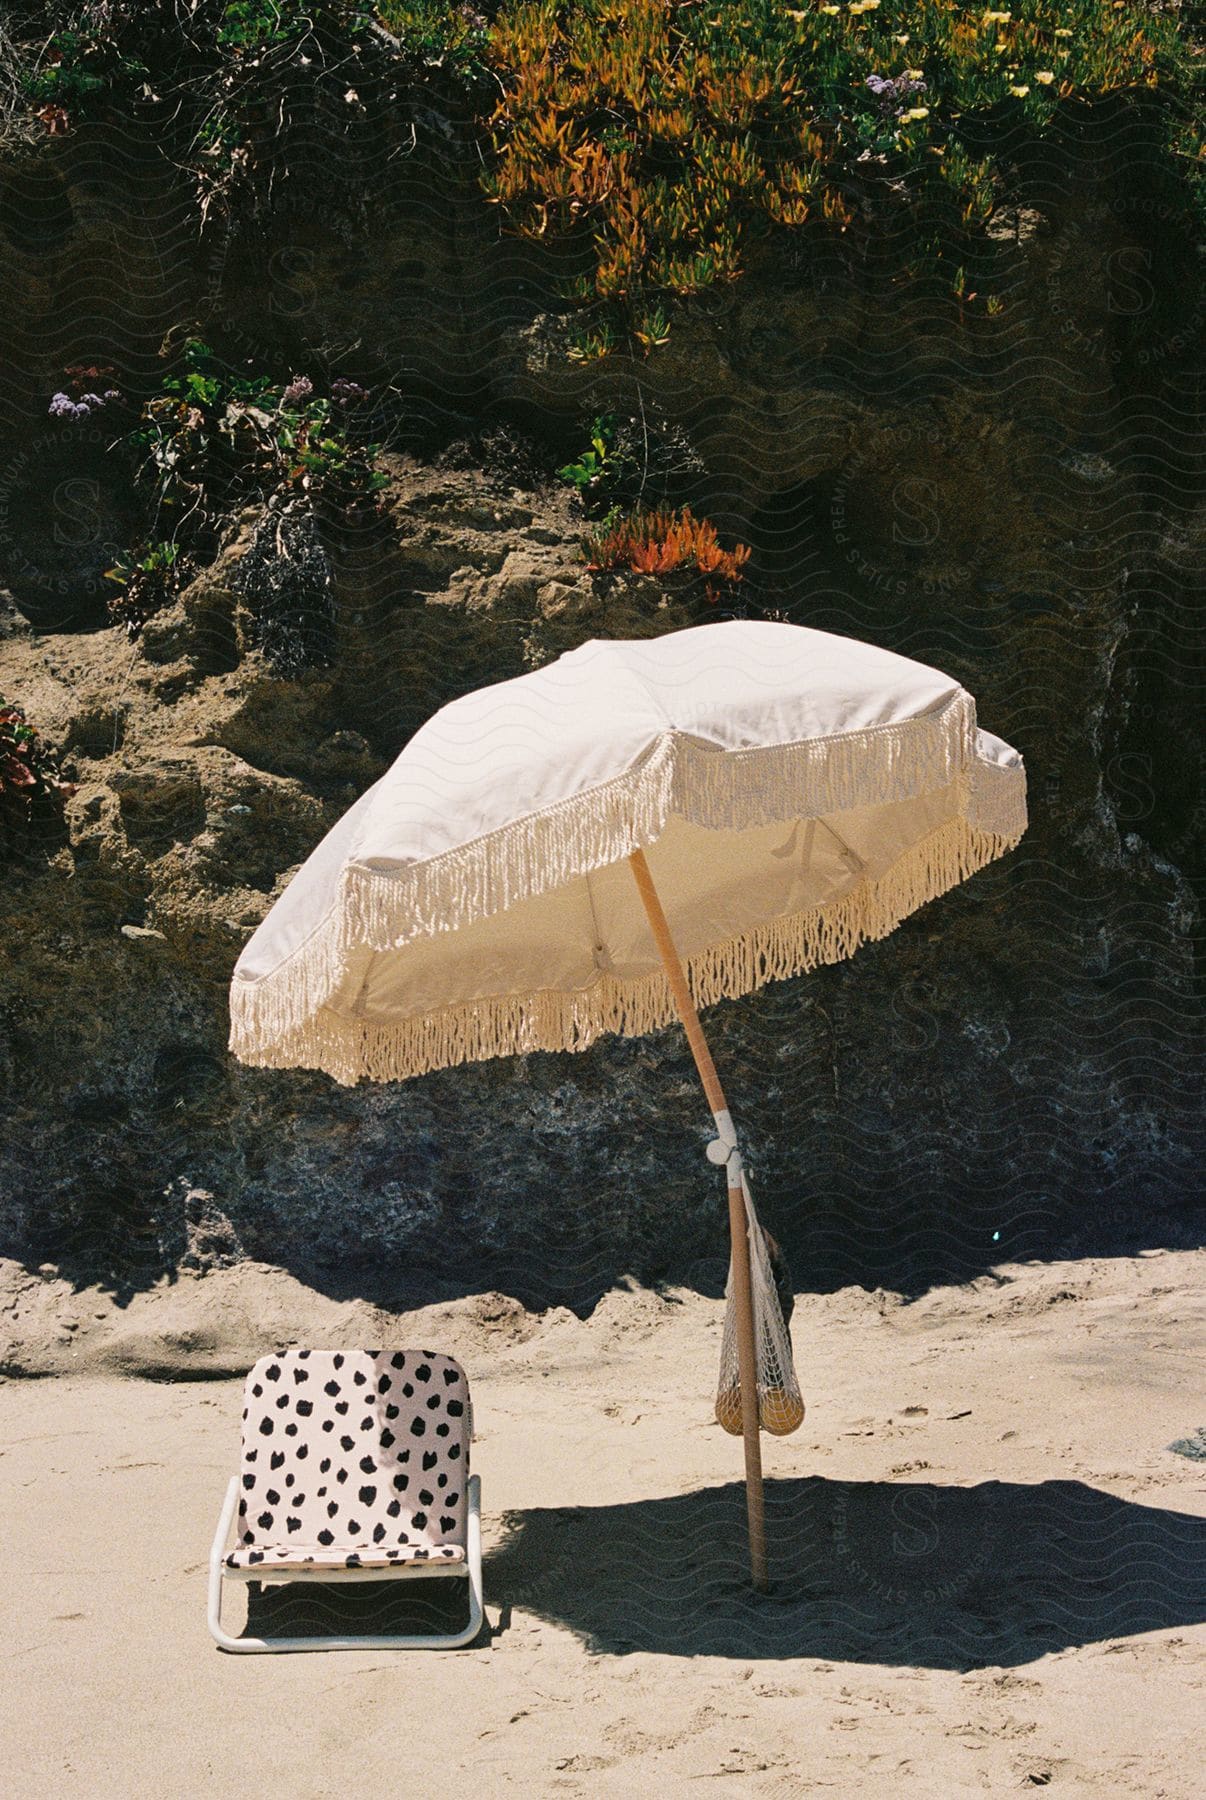 A white fringed beach umbrella beside a black and white spotted beach chair